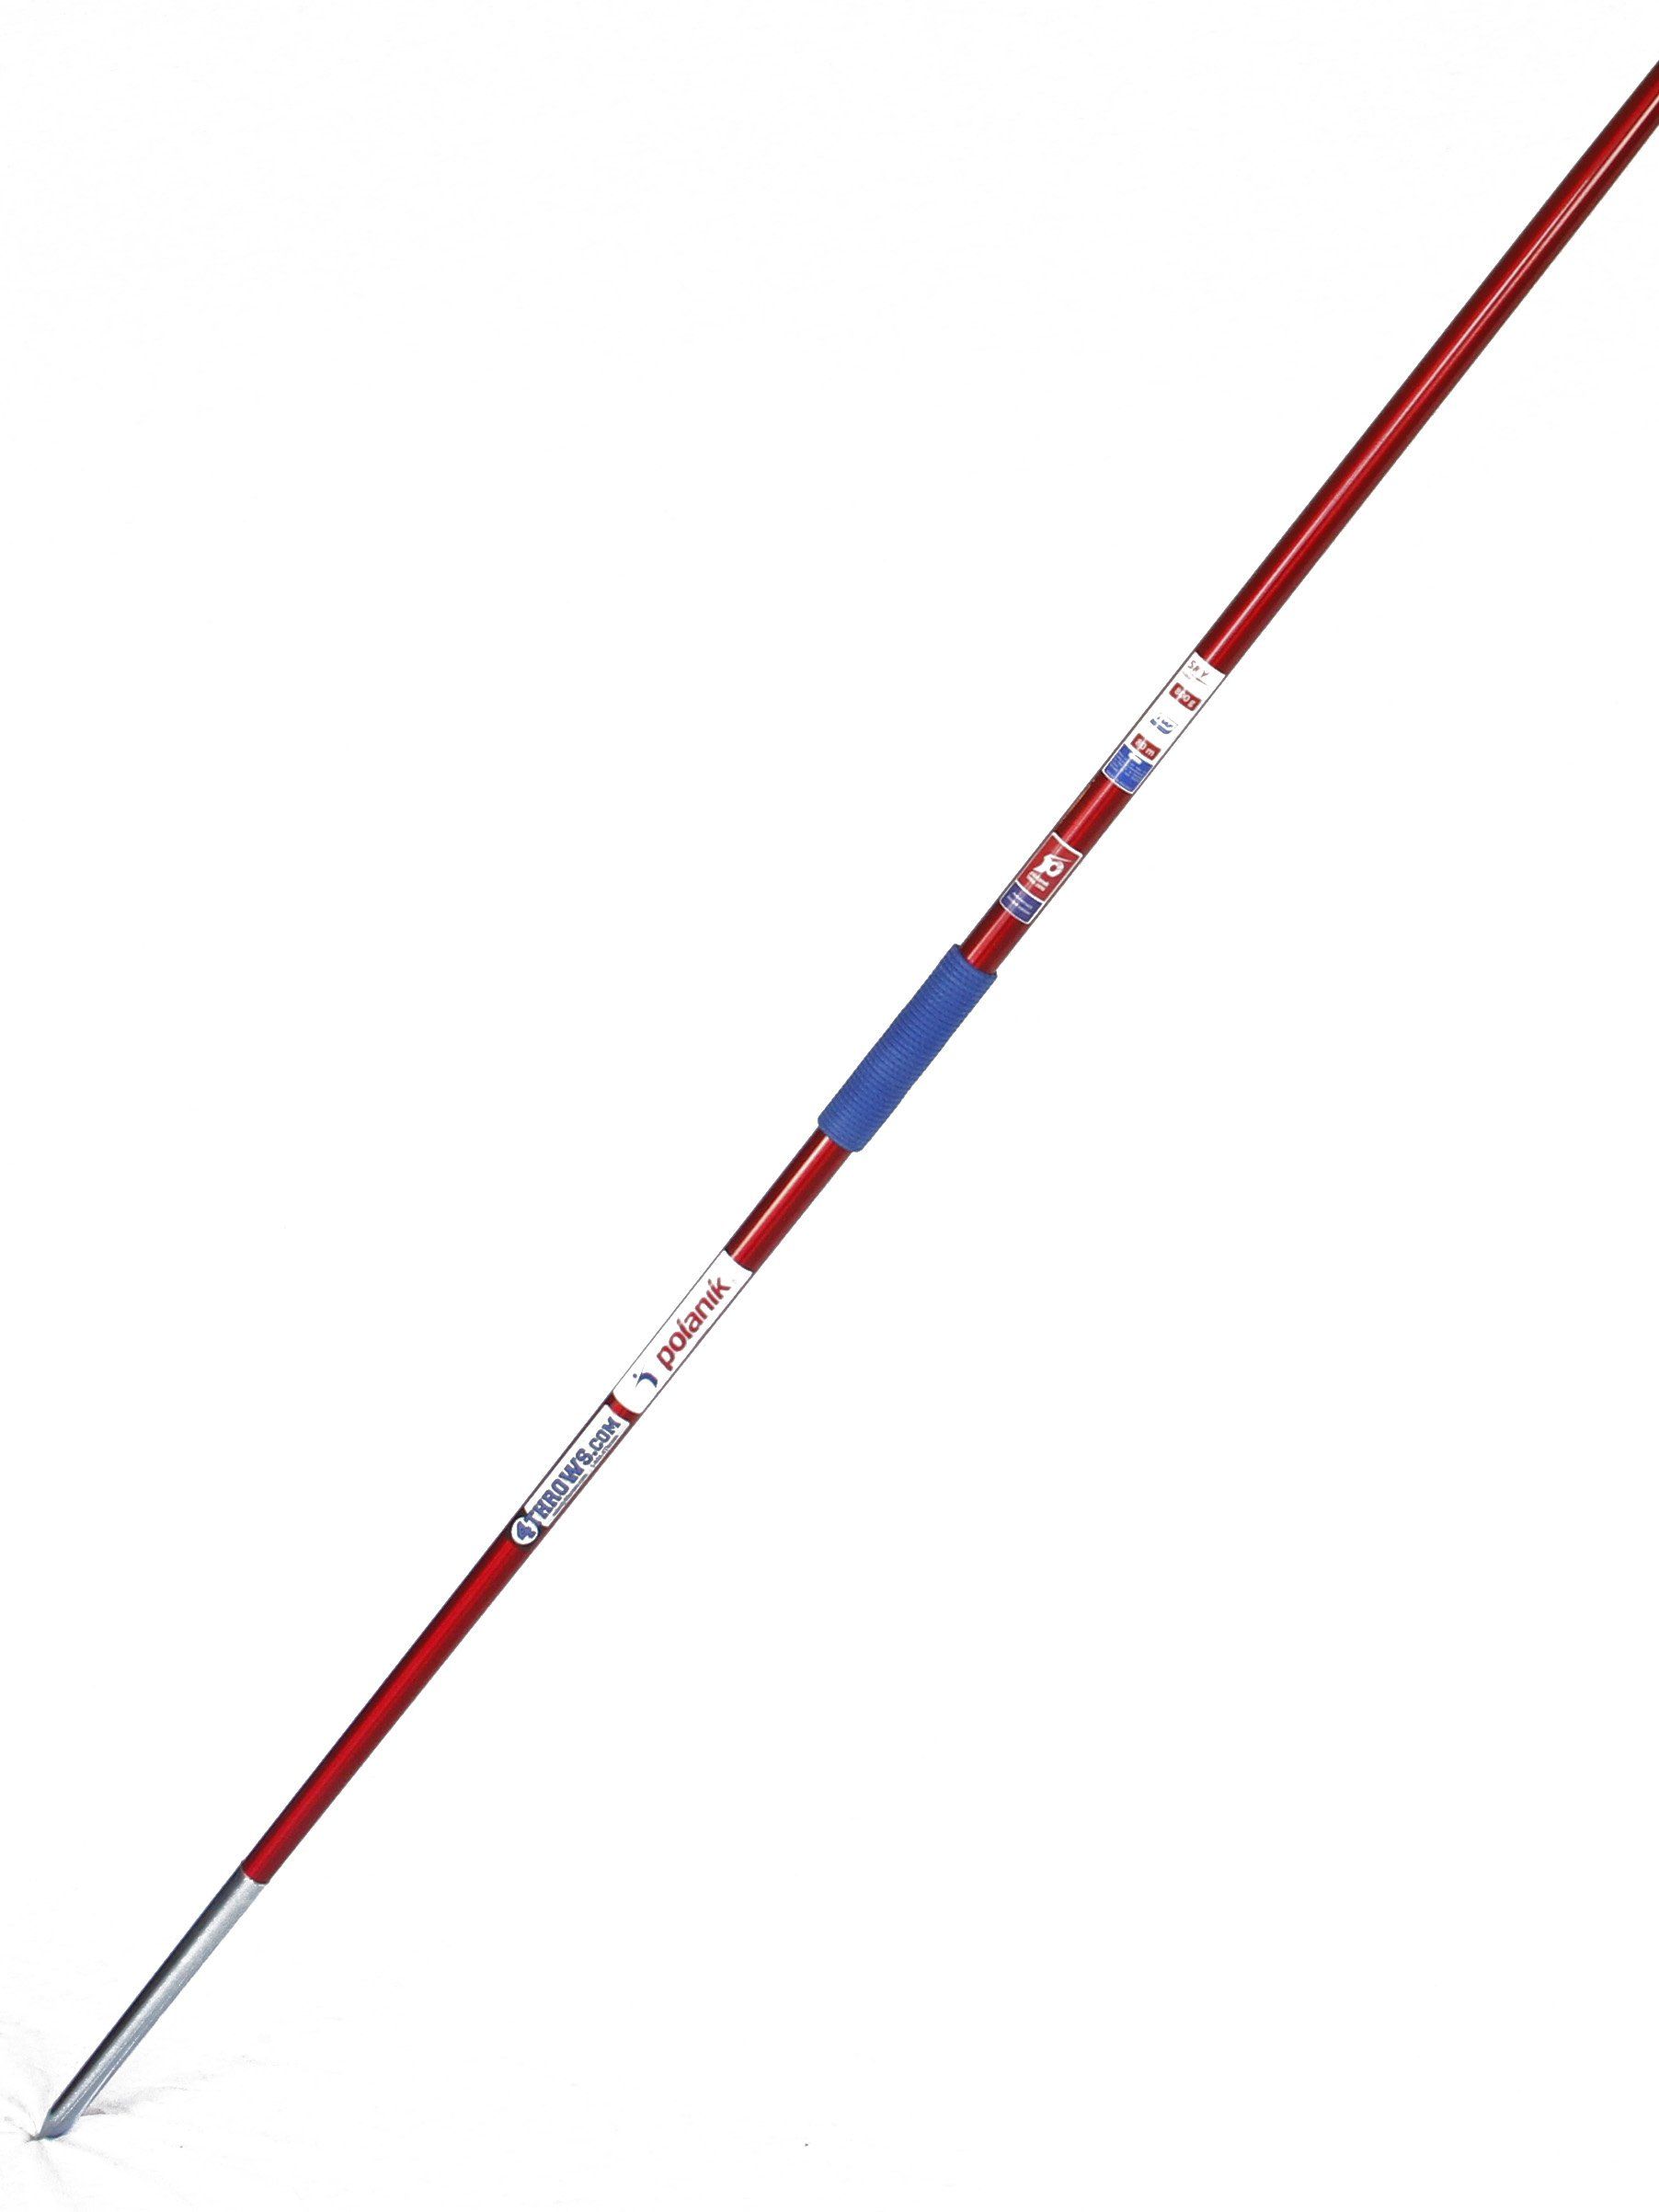 Polanik SkyChallenger - Red Javelin- CLOSE OUT